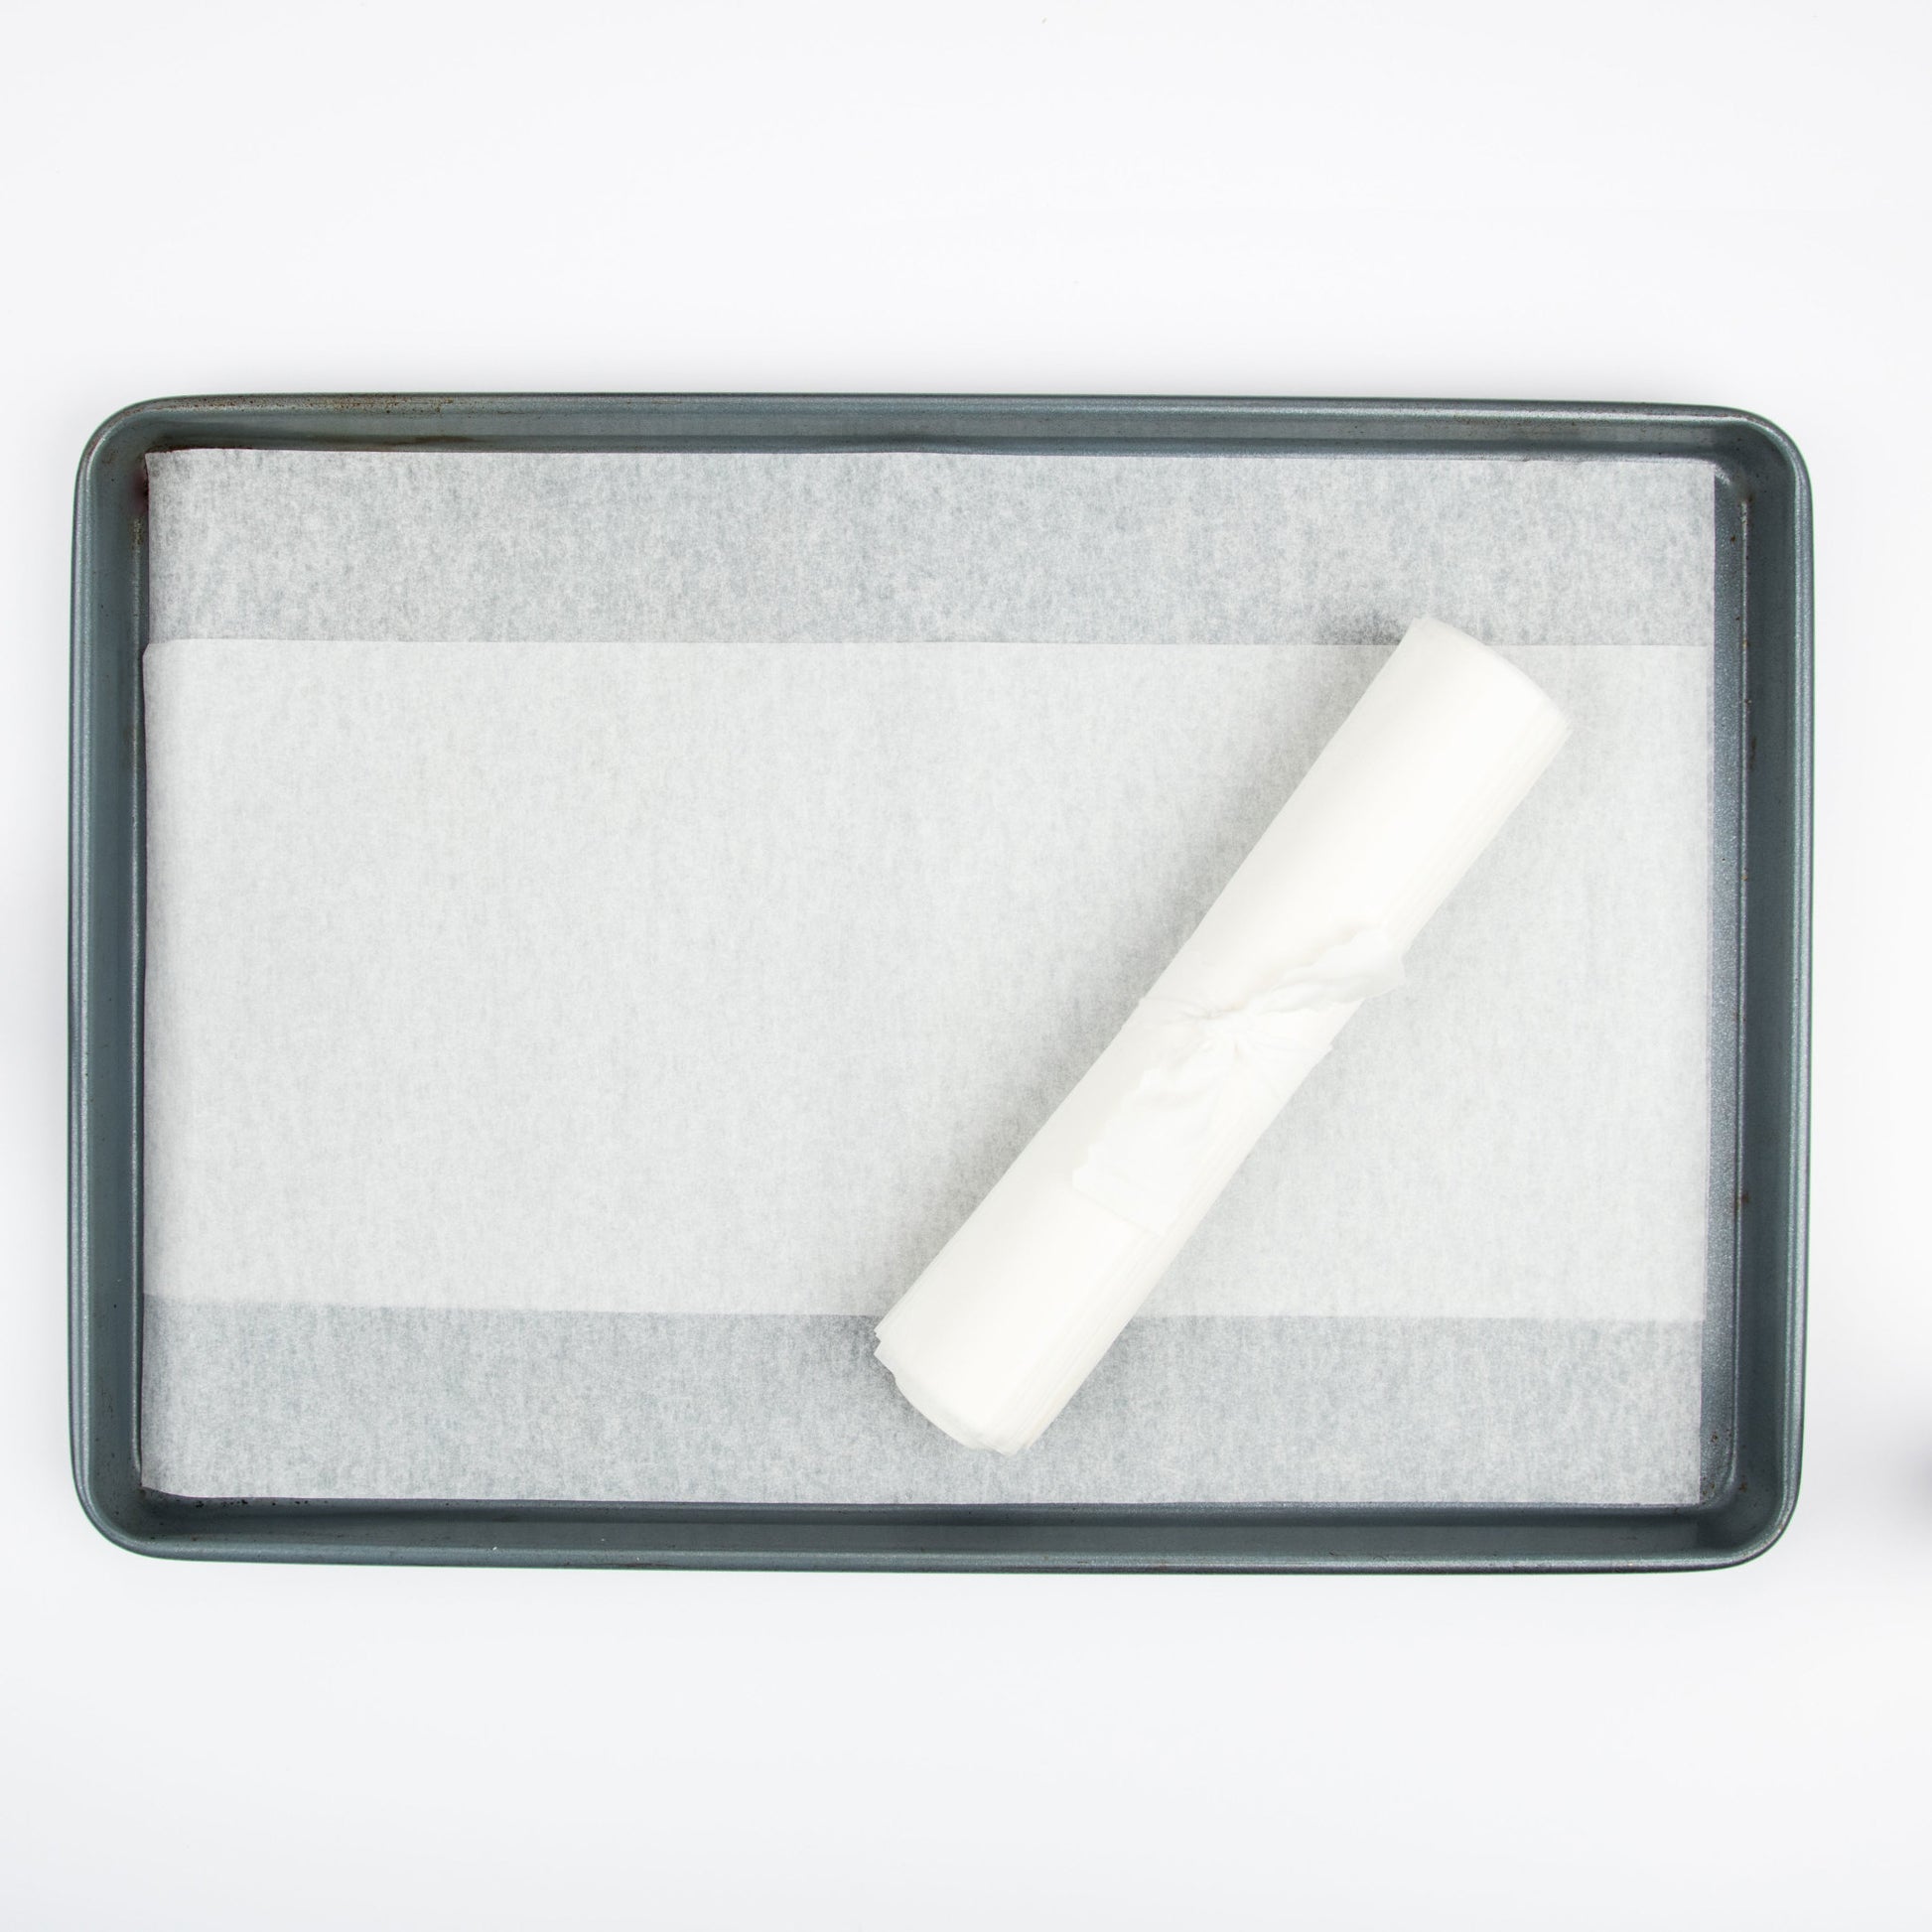 Parchment paper roll on top of parchment paper-lined baking tray